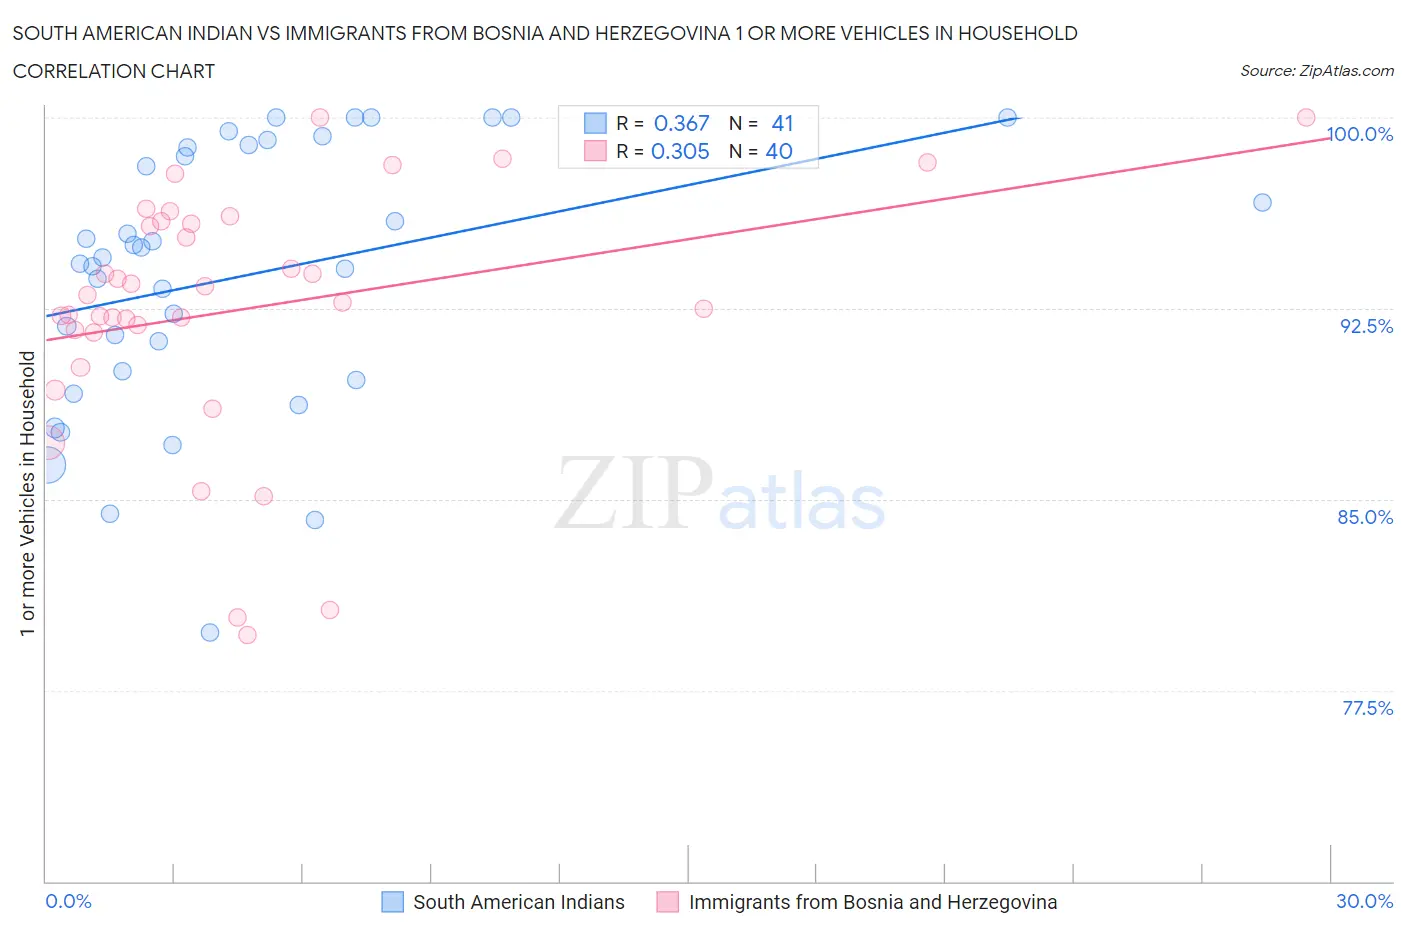 South American Indian vs Immigrants from Bosnia and Herzegovina 1 or more Vehicles in Household